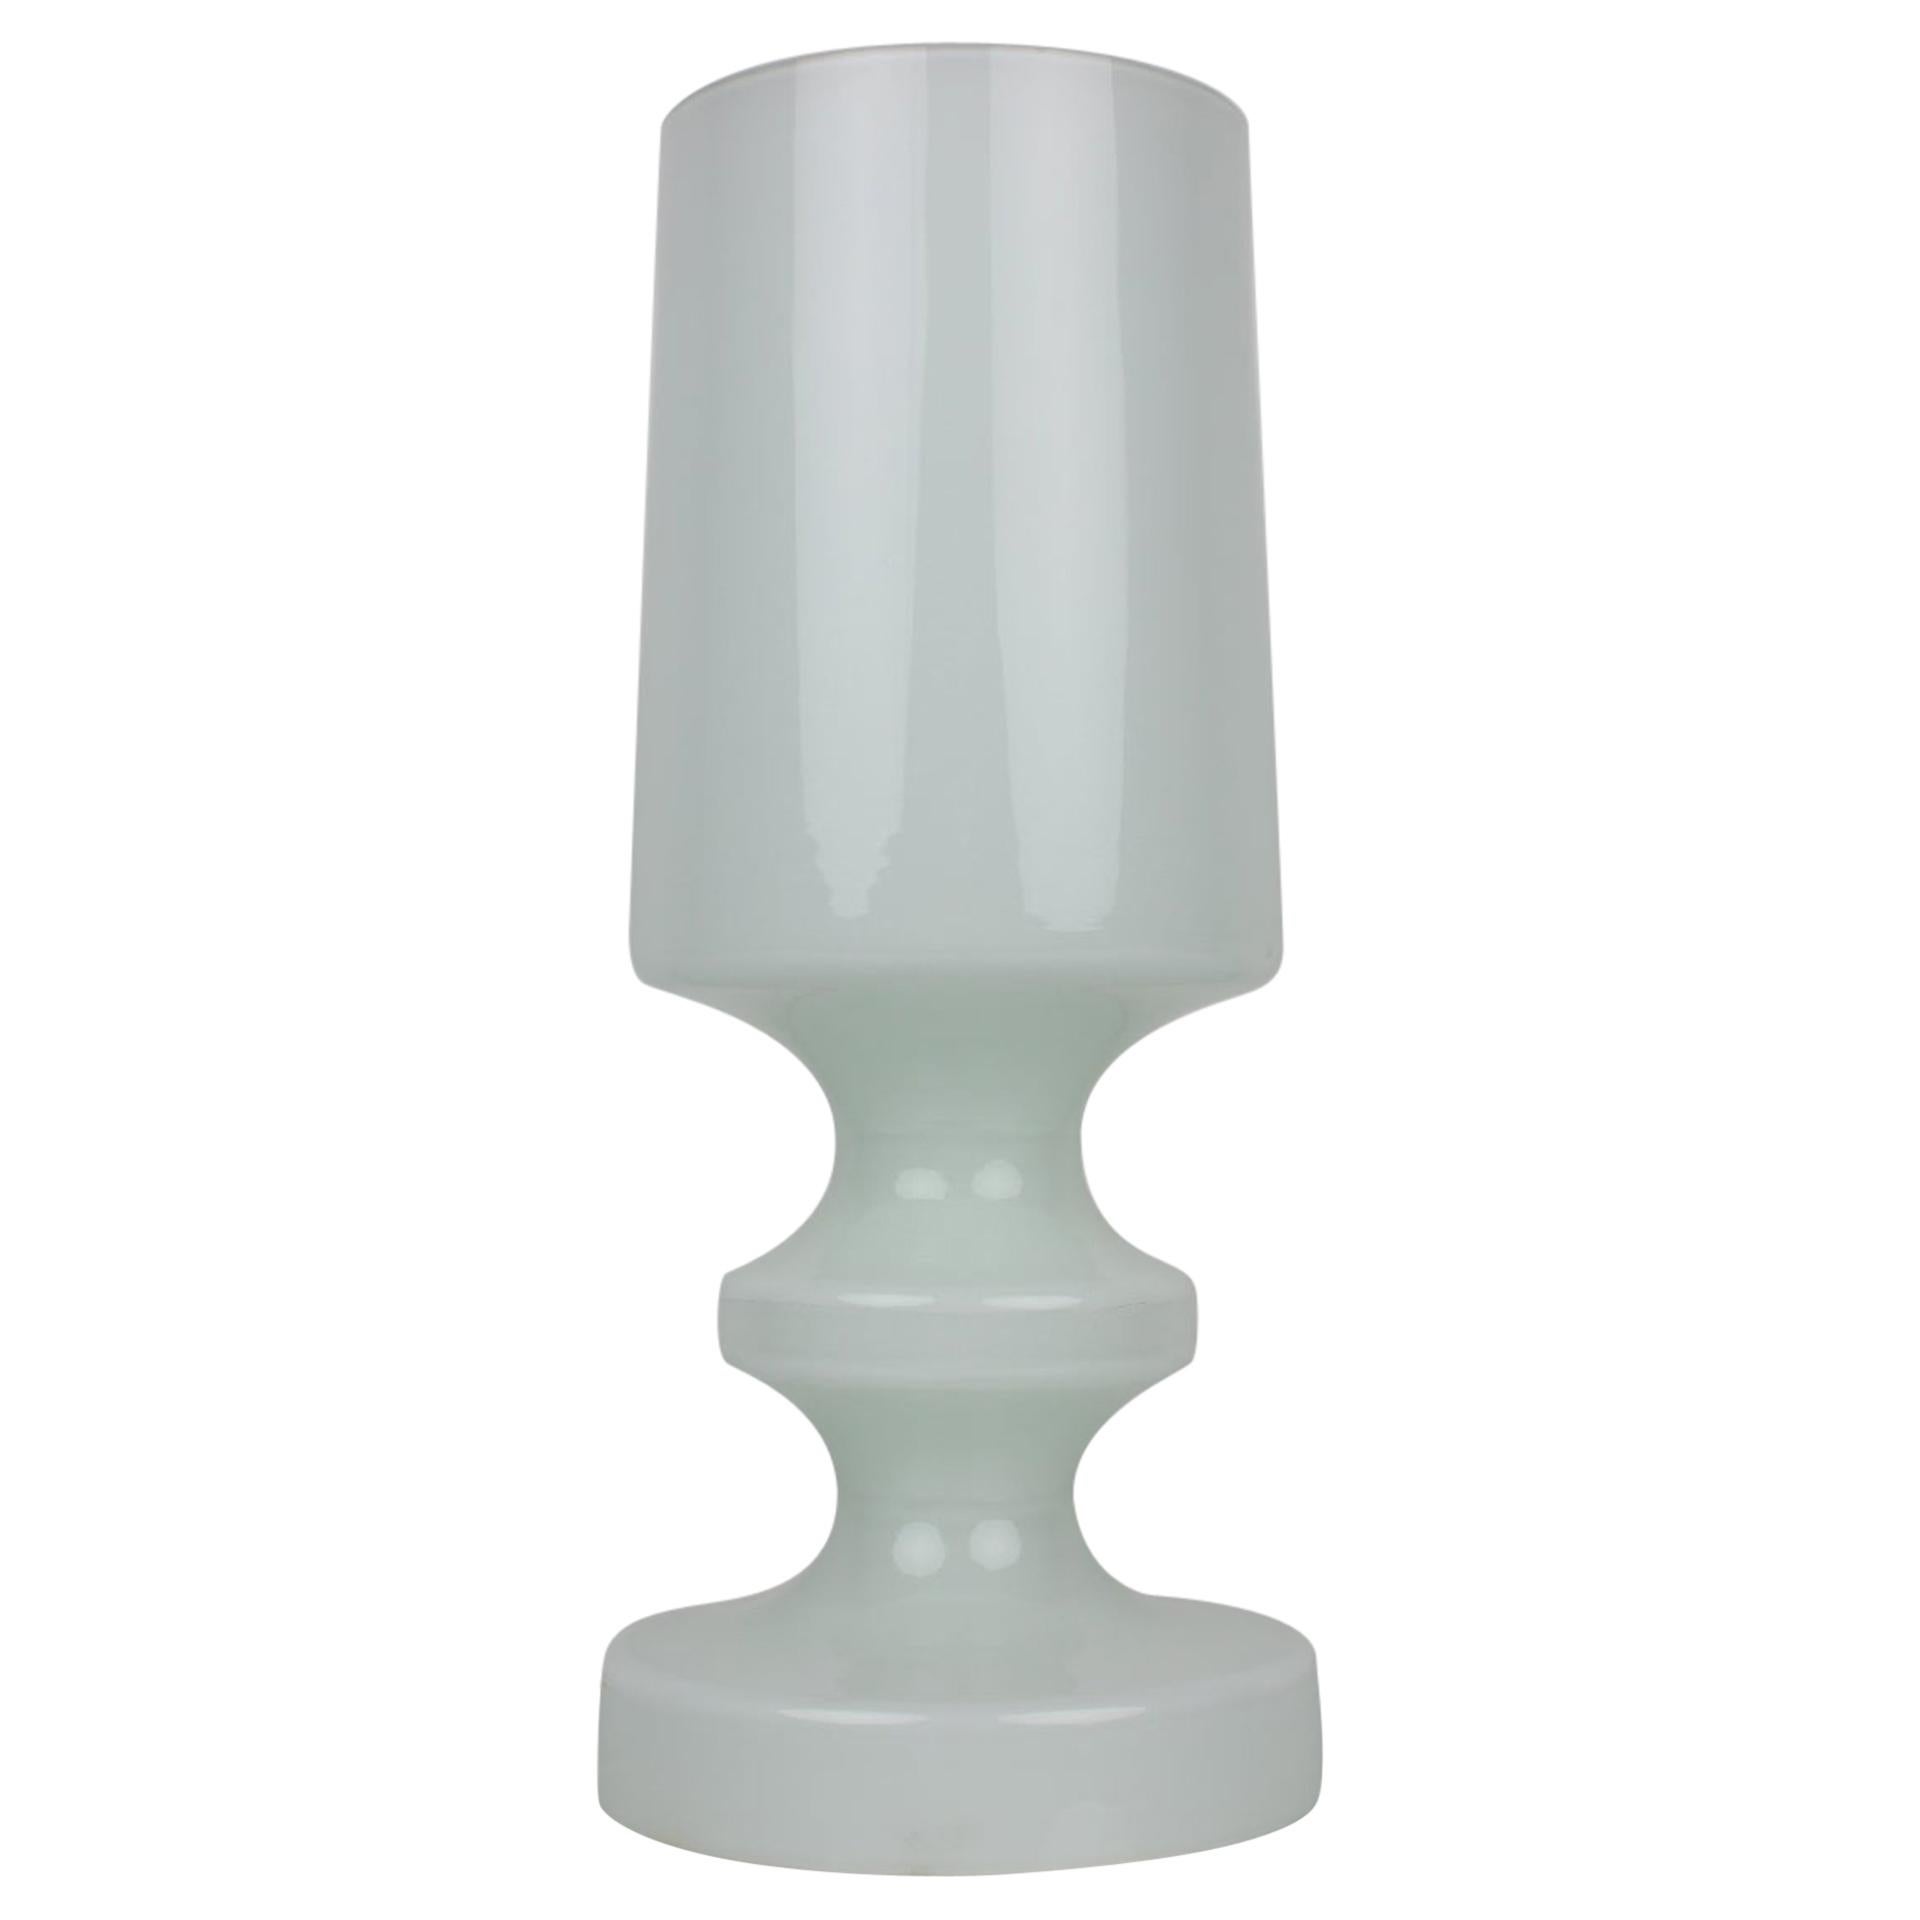 White Allglass Table Lamp Designed by Stefan Tabery, 1930s For Sale